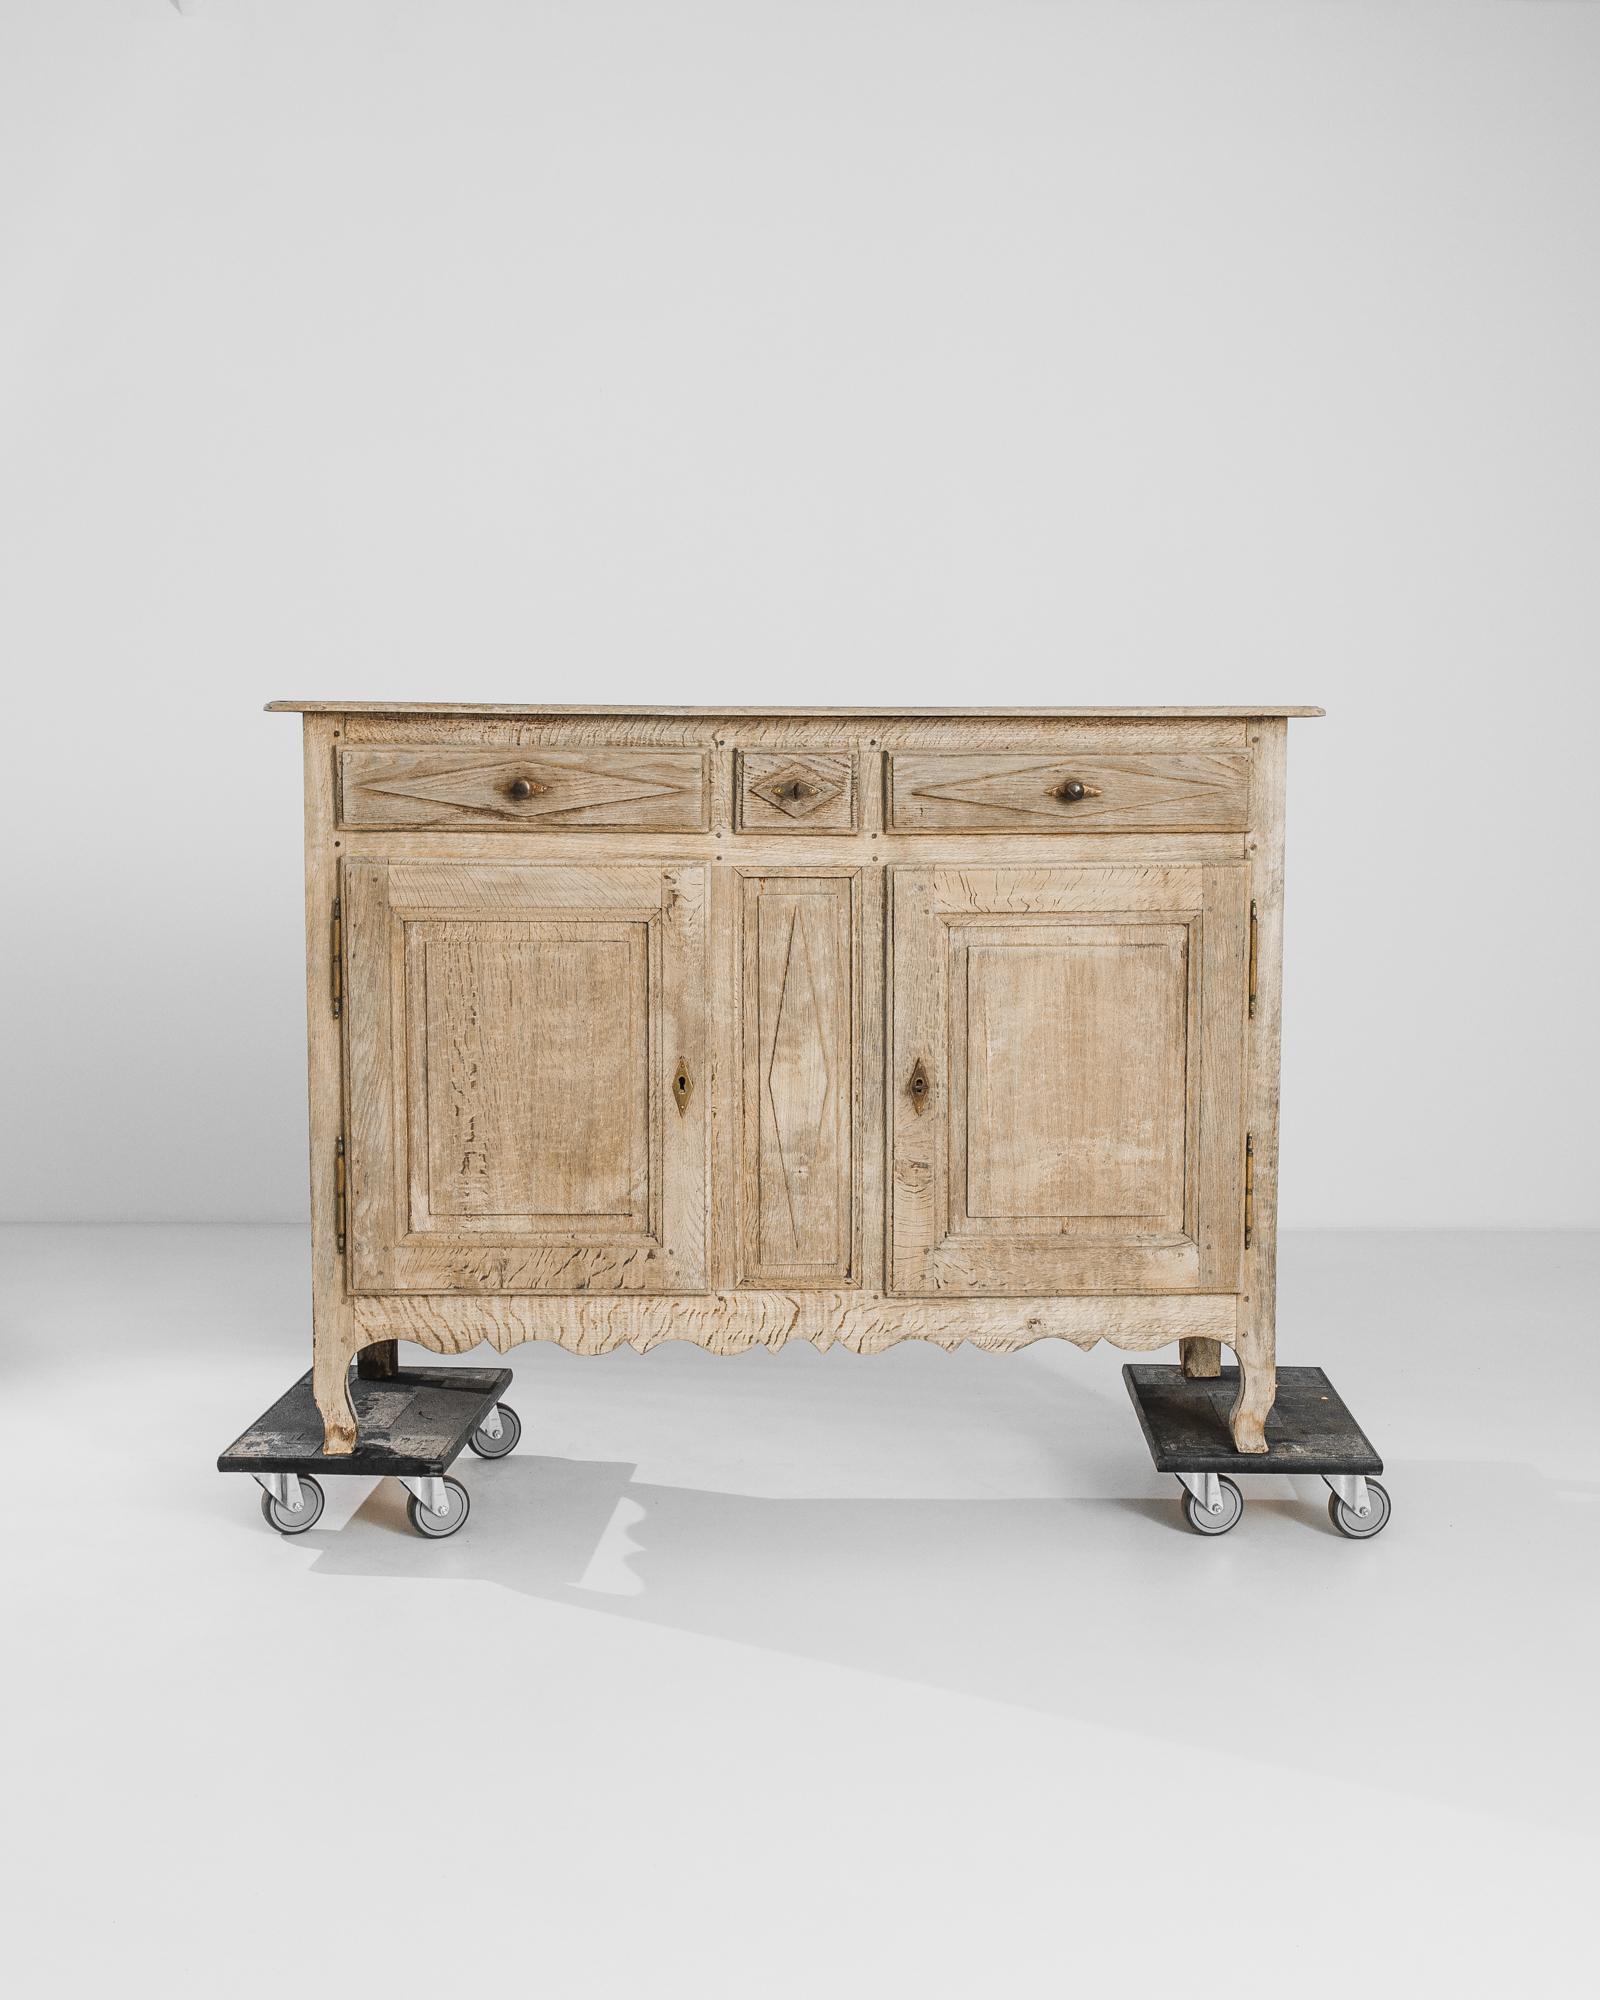 An oak buffet from 1850s France. Cabriole feet and a scalloped apron lend the upright case a refined poise. Carved diamond accents on the panels of the drawers lend a graphic touch, echoed in the gilded diamond lock-pieces.The wood has been restored